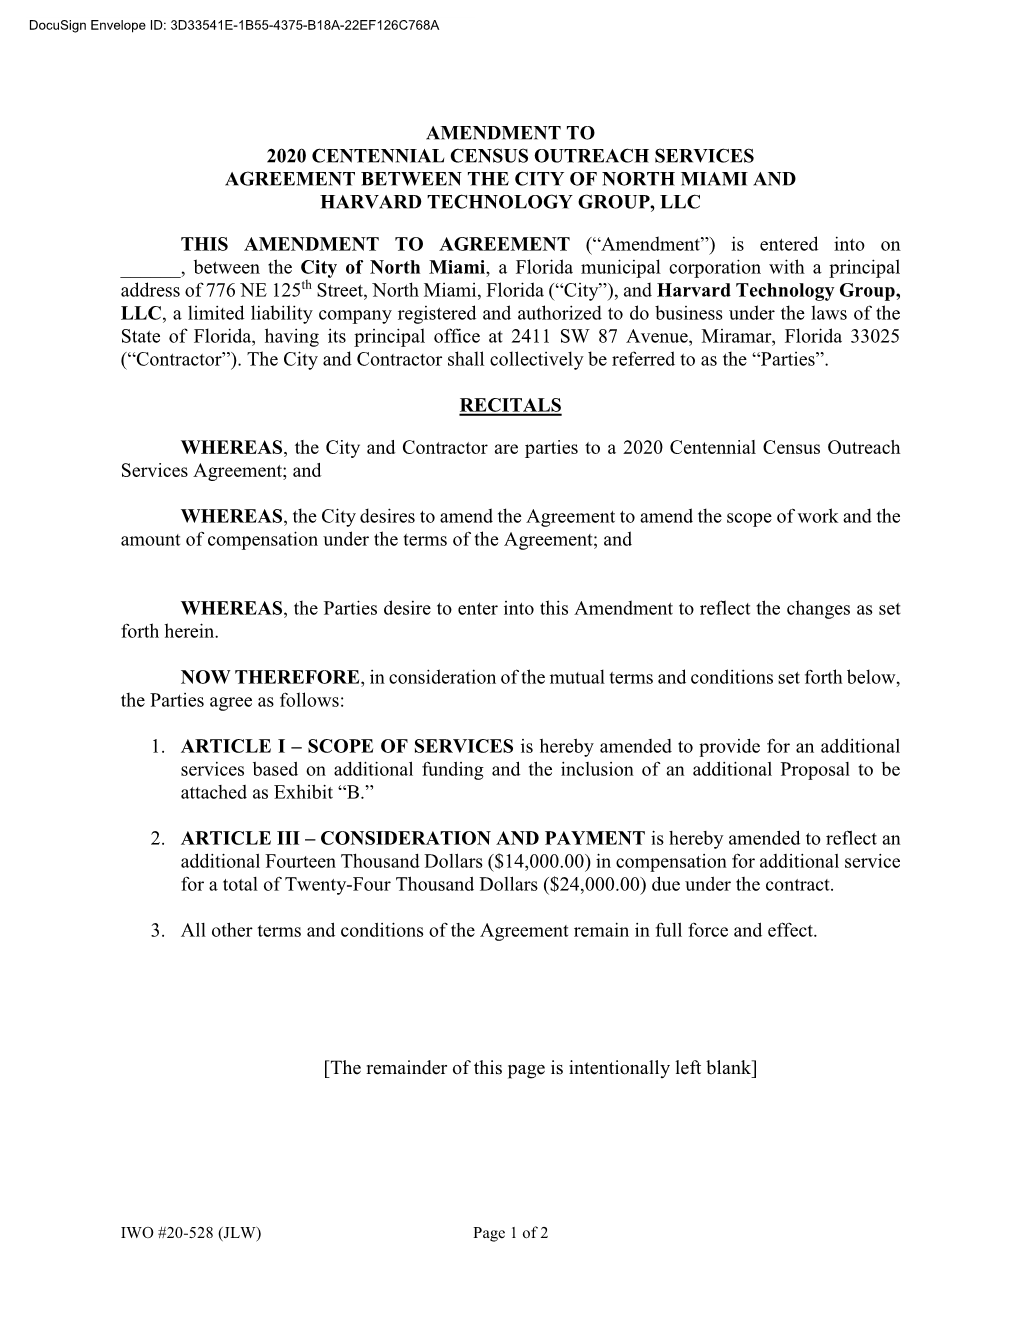 Amendment to 2020 Centennial Census Outreach Services Agreement Between the City of North Miami and Harvard Technology Group, Llc